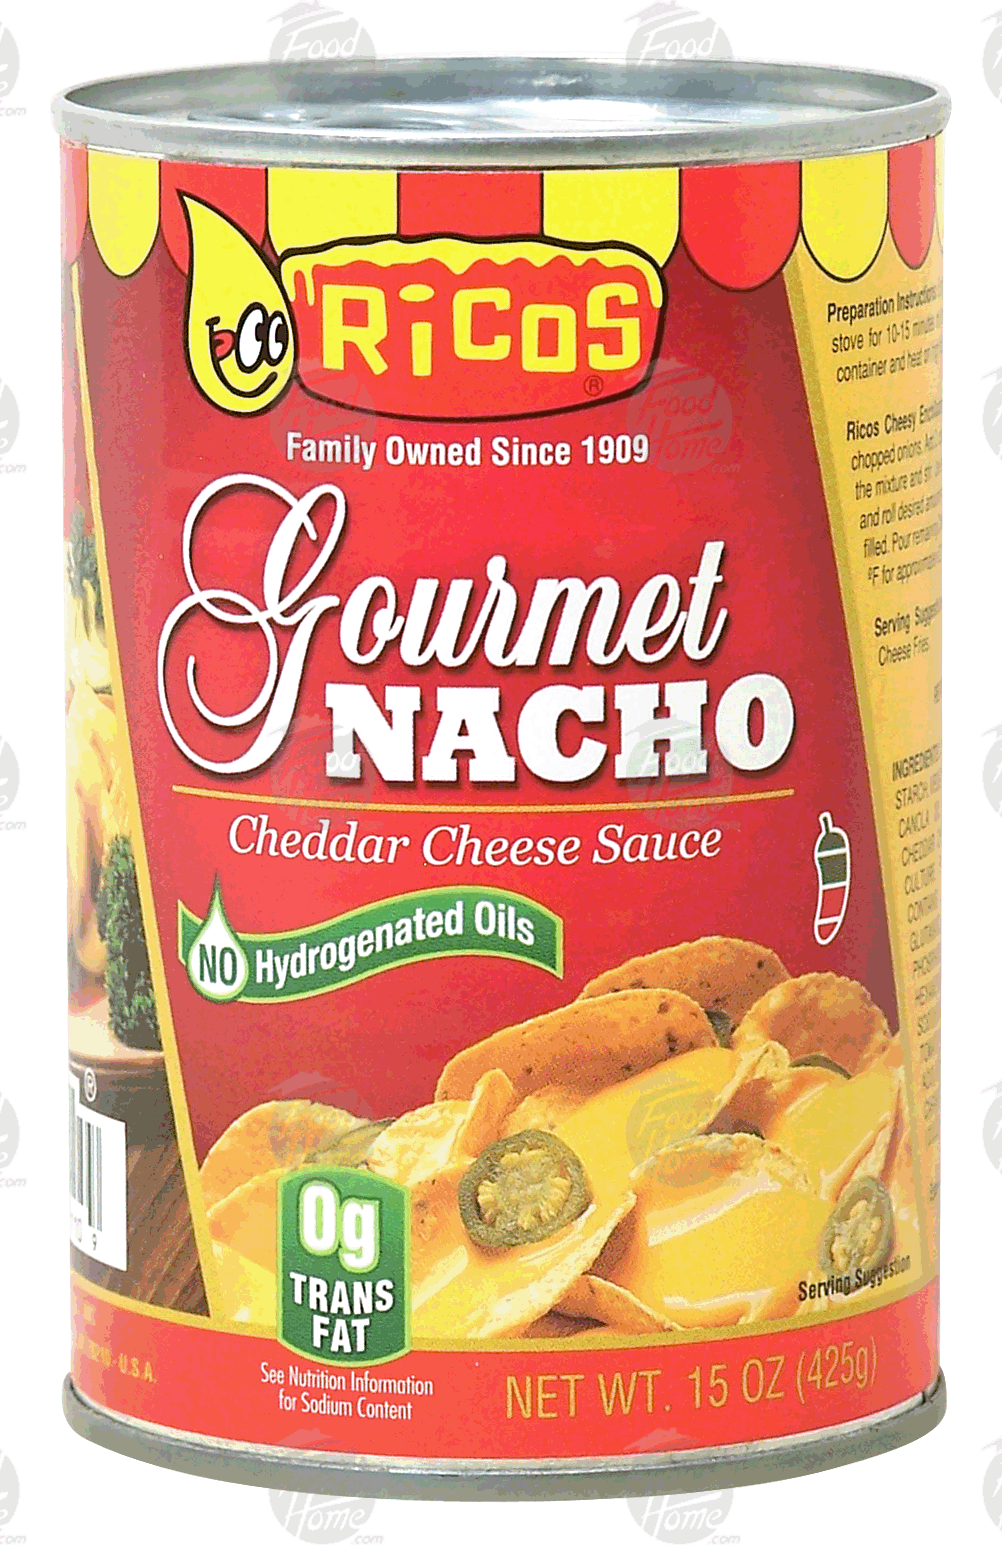 Ricos Gourmet nacho cheese sauce Full-Size Picture